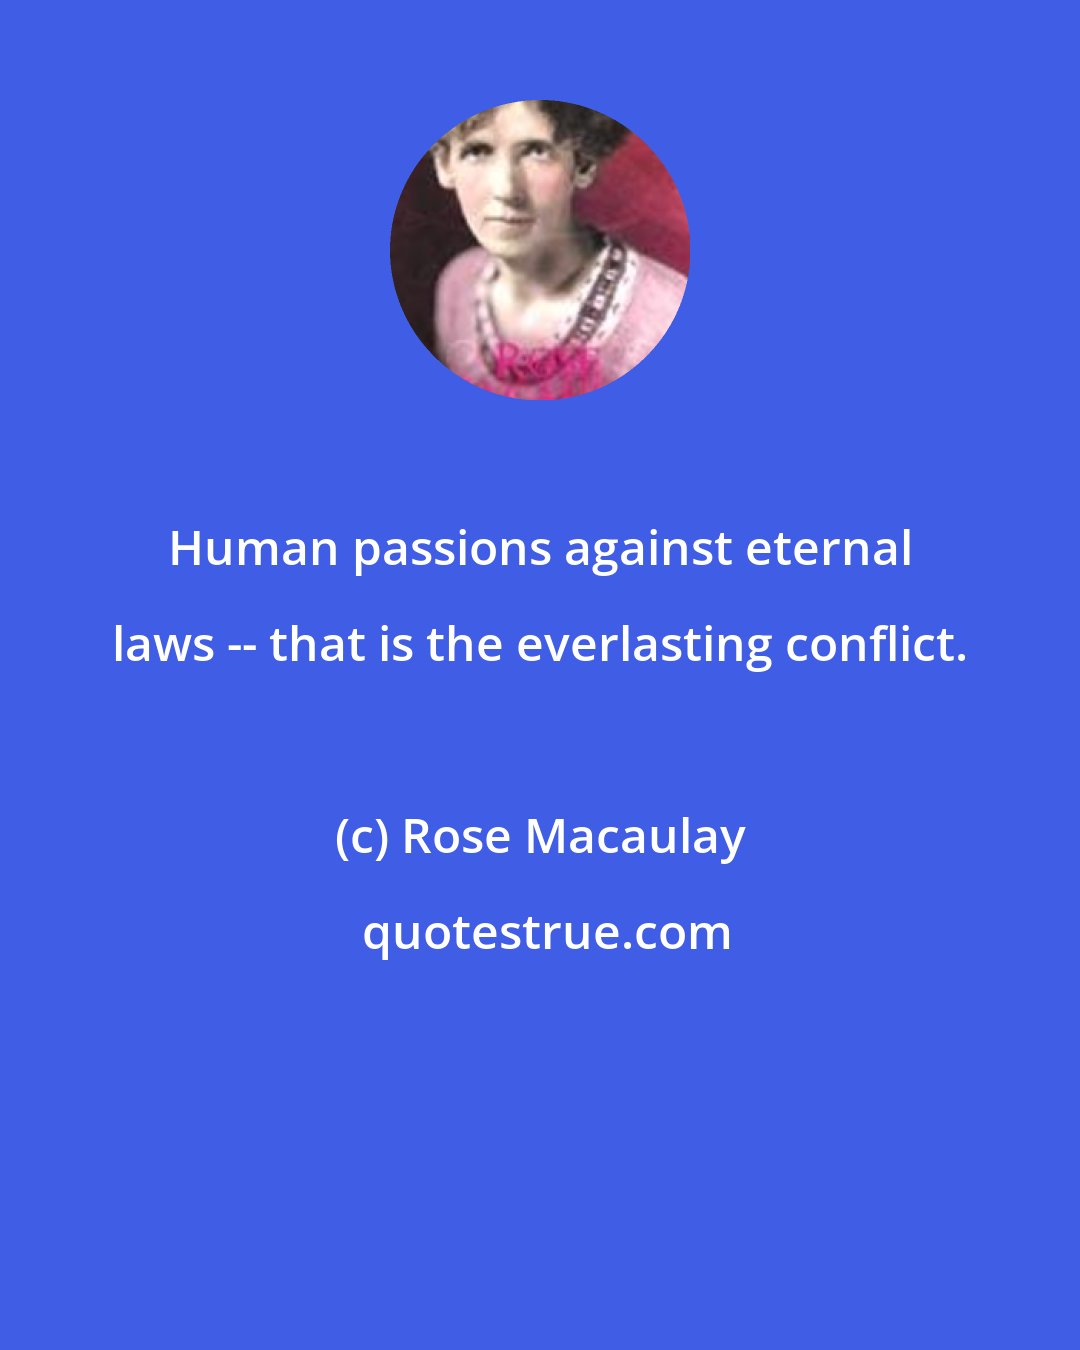 Rose Macaulay: Human passions against eternal laws -- that is the everlasting conflict.